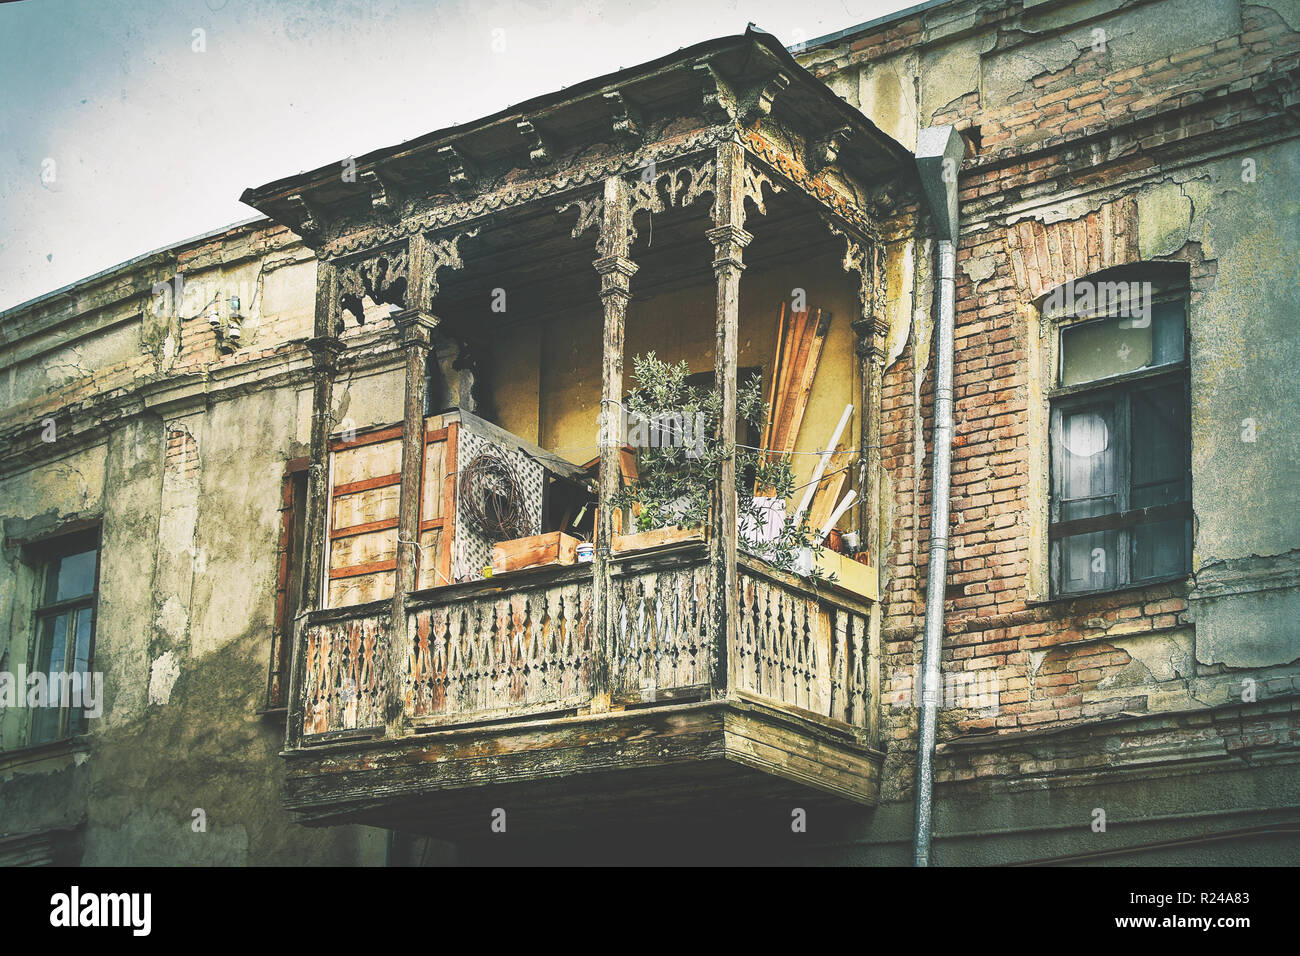 Old traditional Georgian style architecture wooden balcony with carved decorations in old town Tbilisi Stock Photo